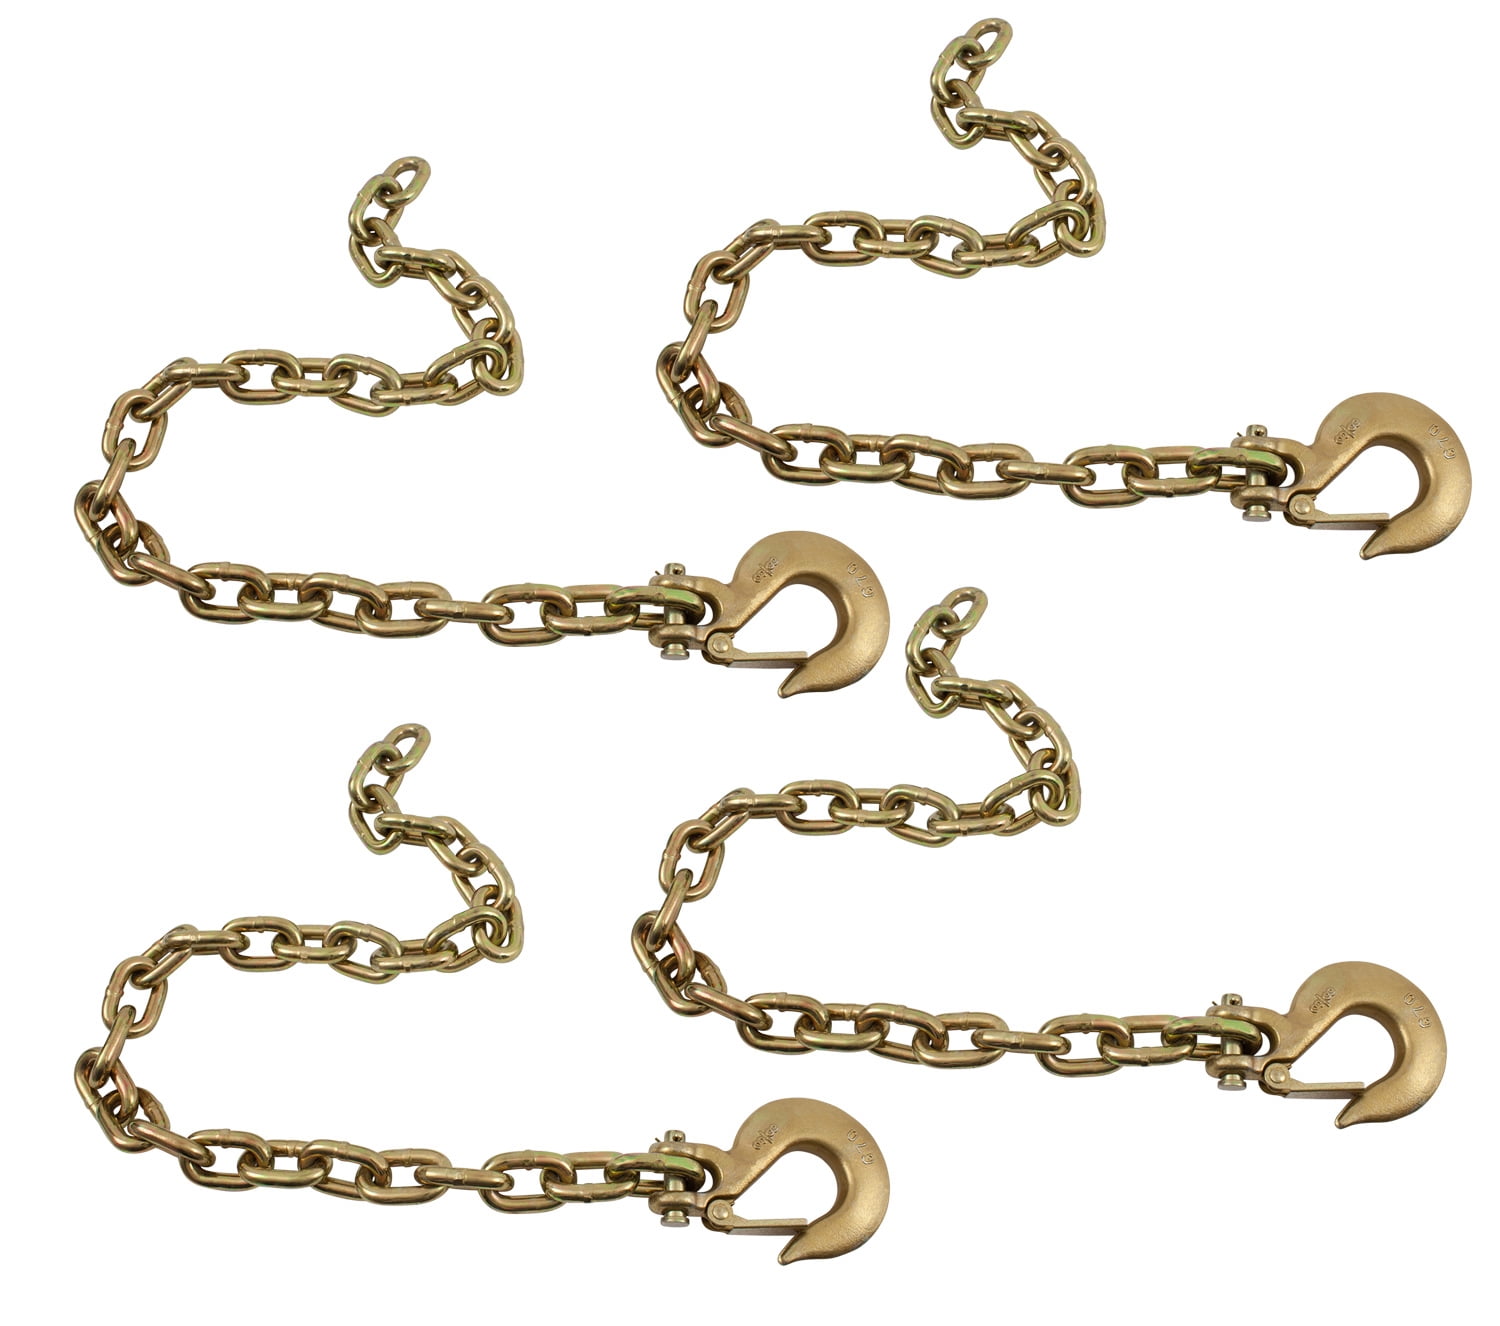 Libra 2 New 5/16 x 30 Grade 30 Trailer Safety Chains W/S Hook & Safety Latch - 25006